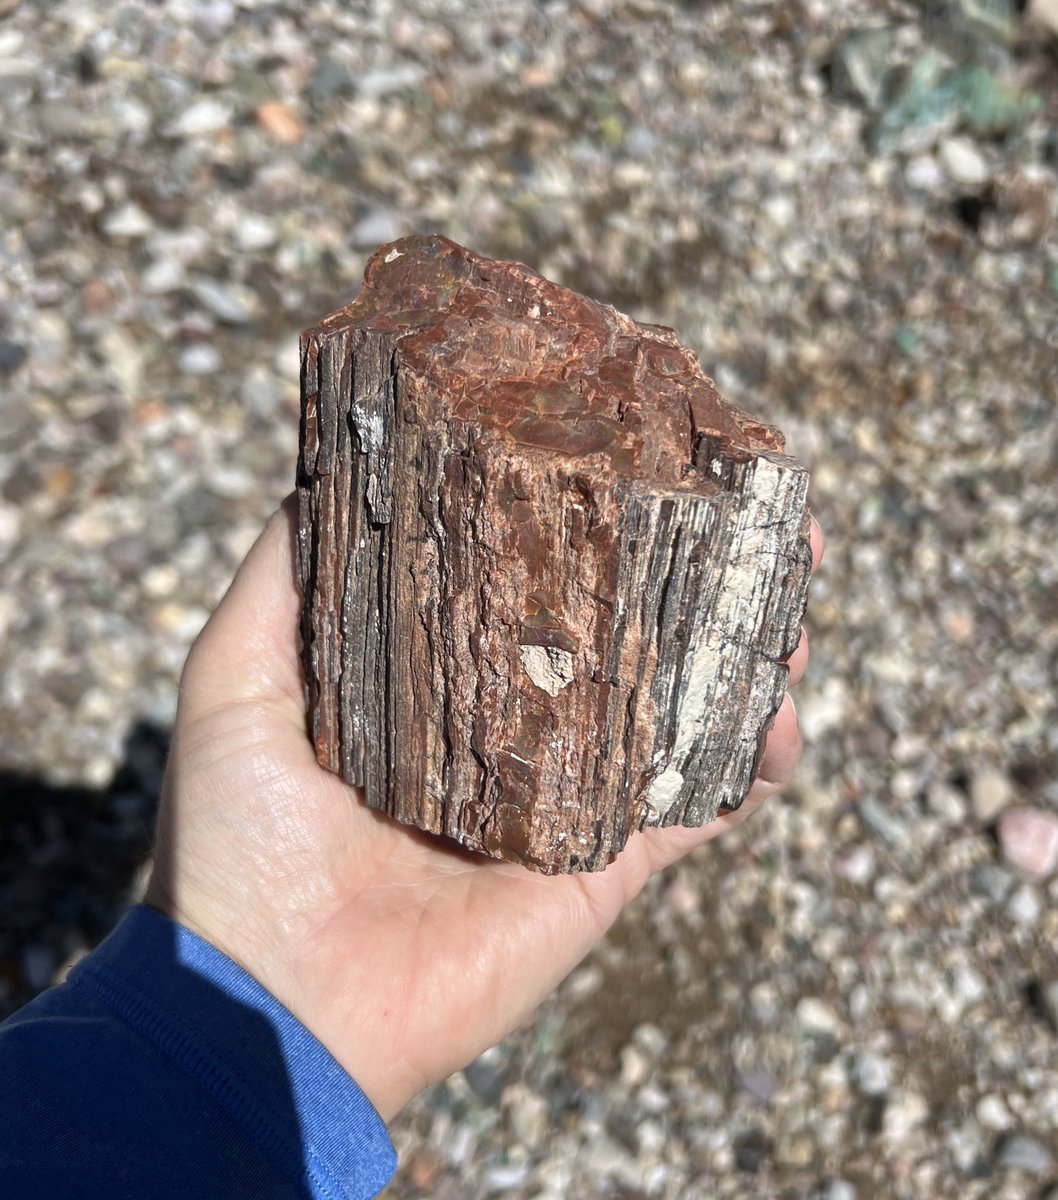 Petrified Wood I collected from a ranch in Navajo County, Arizona #FossilFriday #fossils